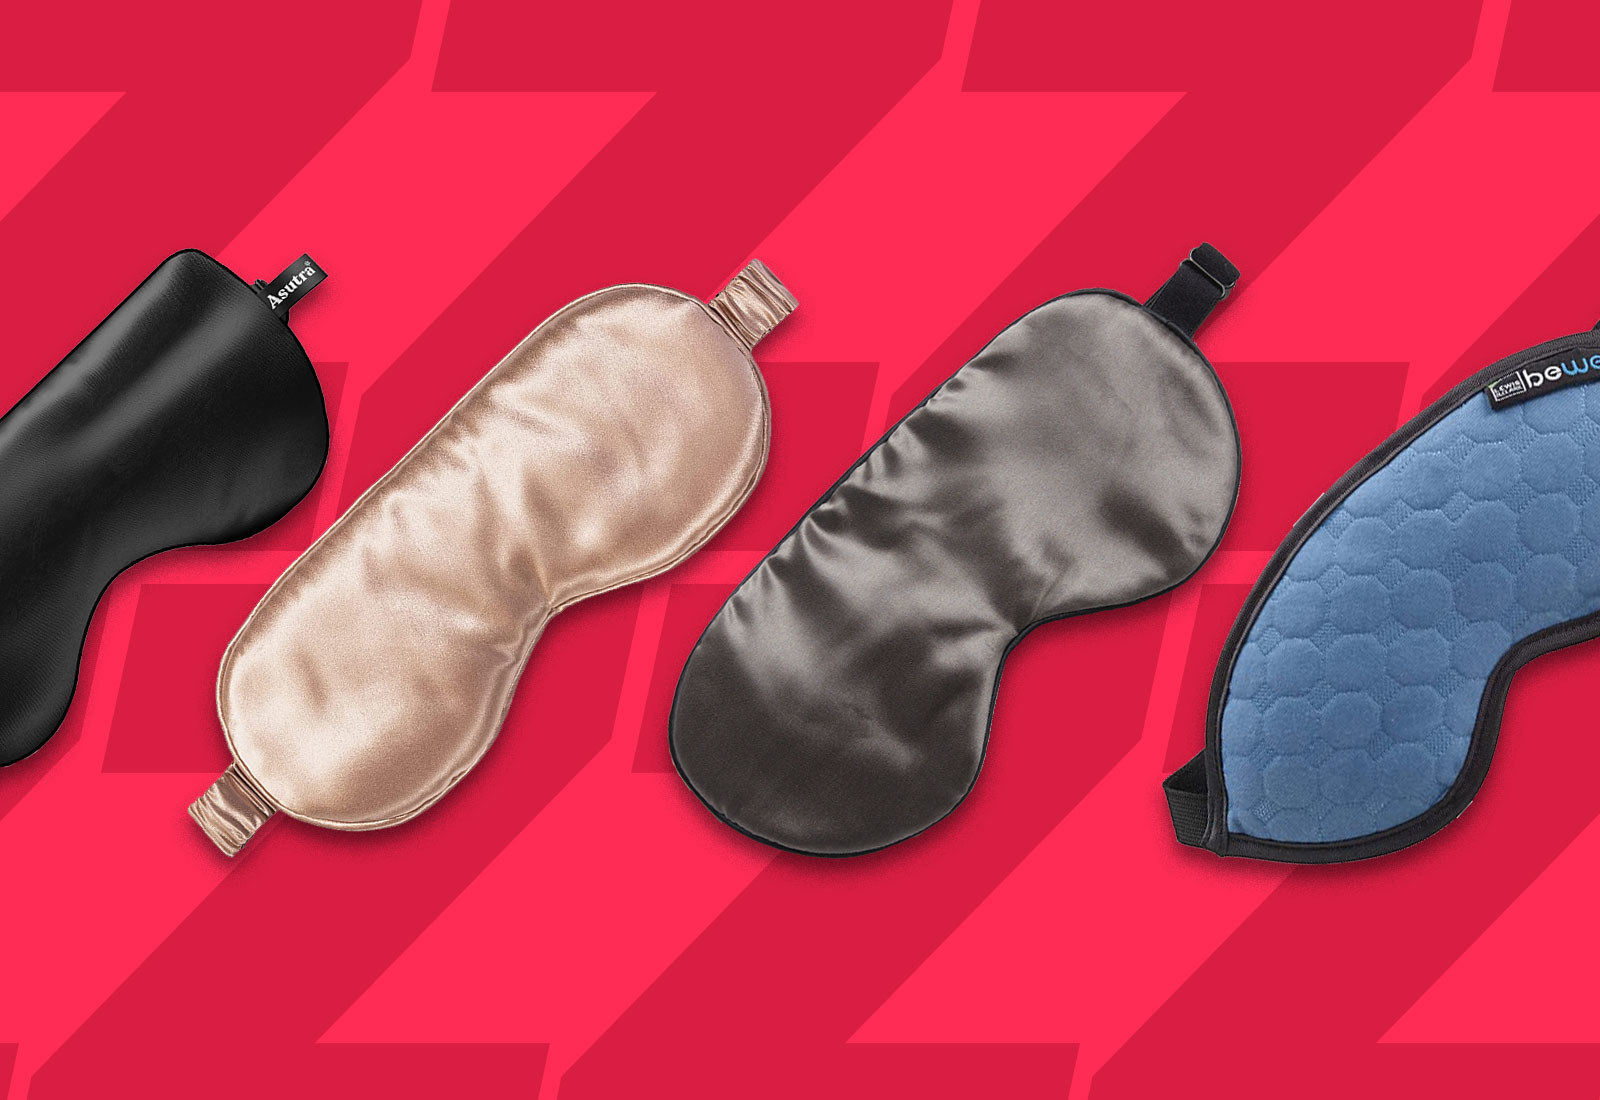 I've Tried Dozens of Sleep Masks—This One Is Hands Down the Comfiest - Poosh